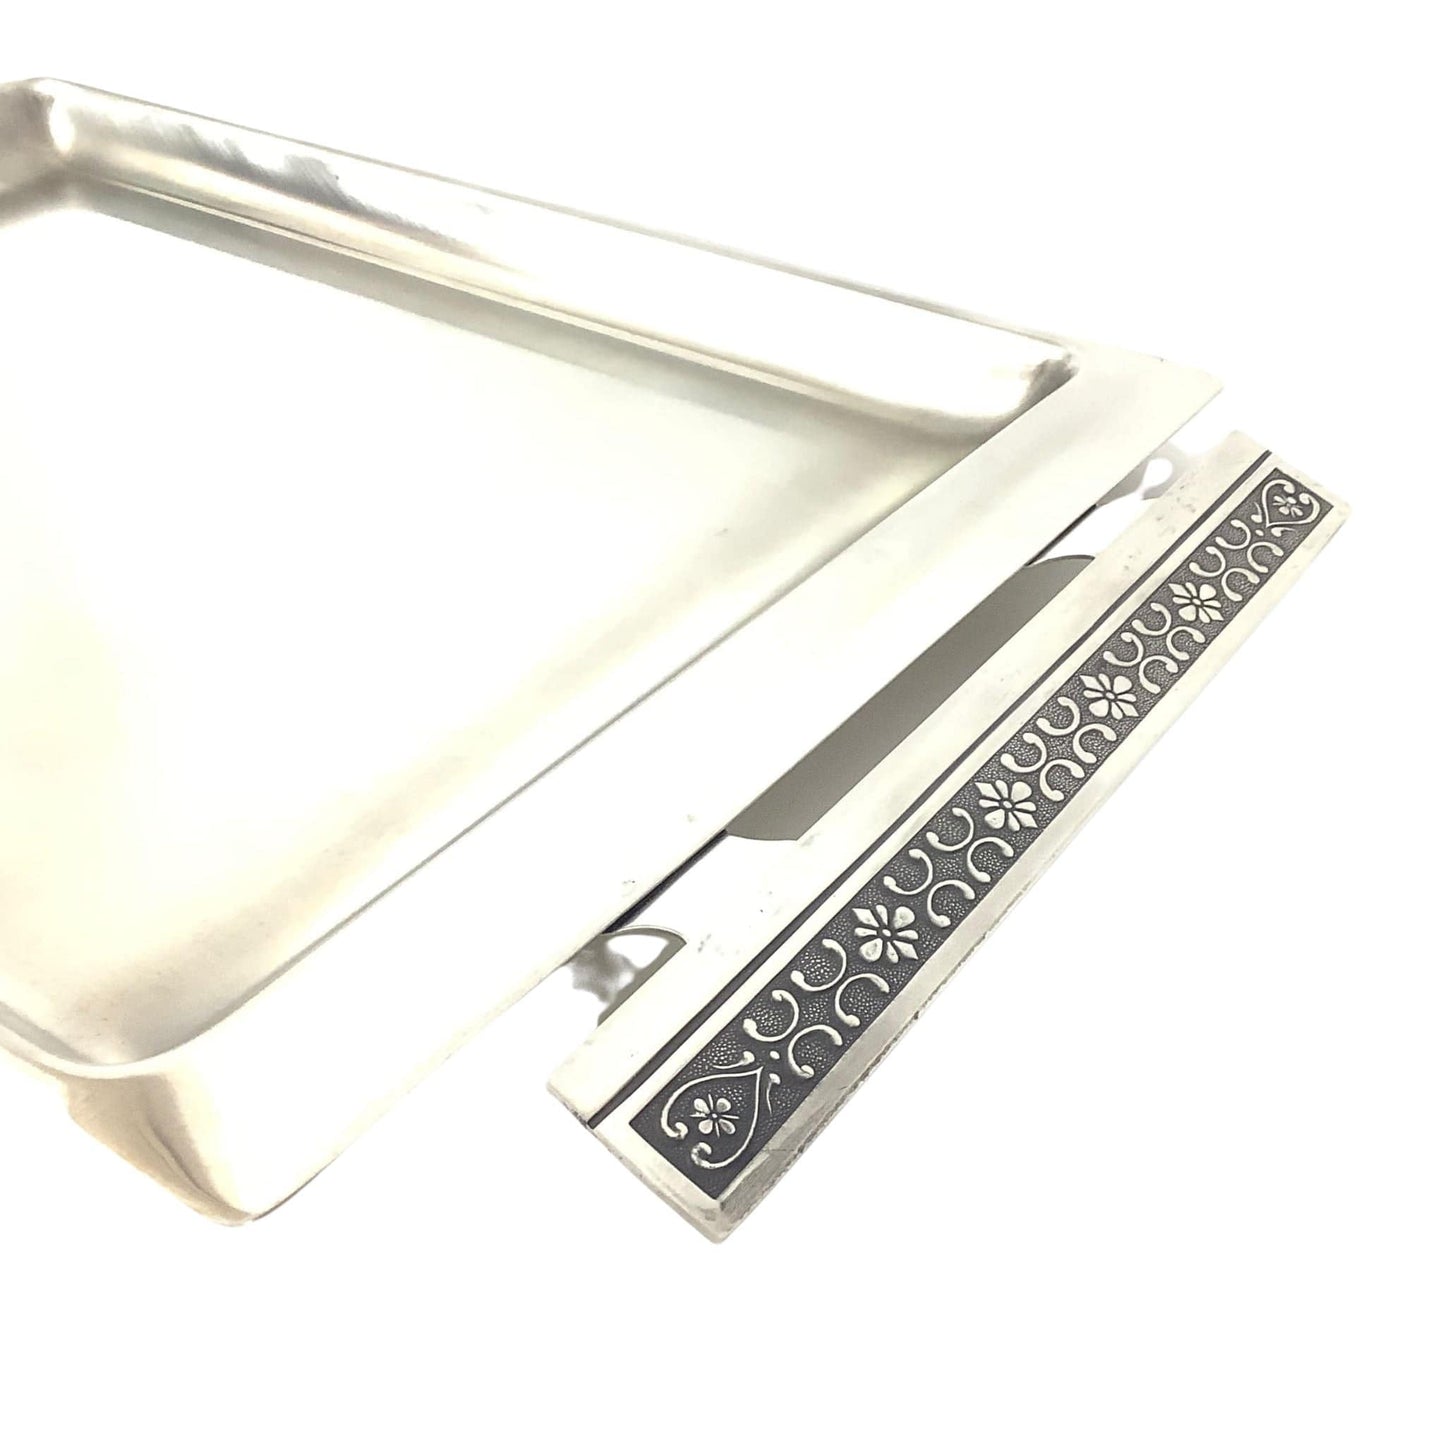 Mid Century Stainless Tray Stainless / Stainless Steel / Mid Century Modern